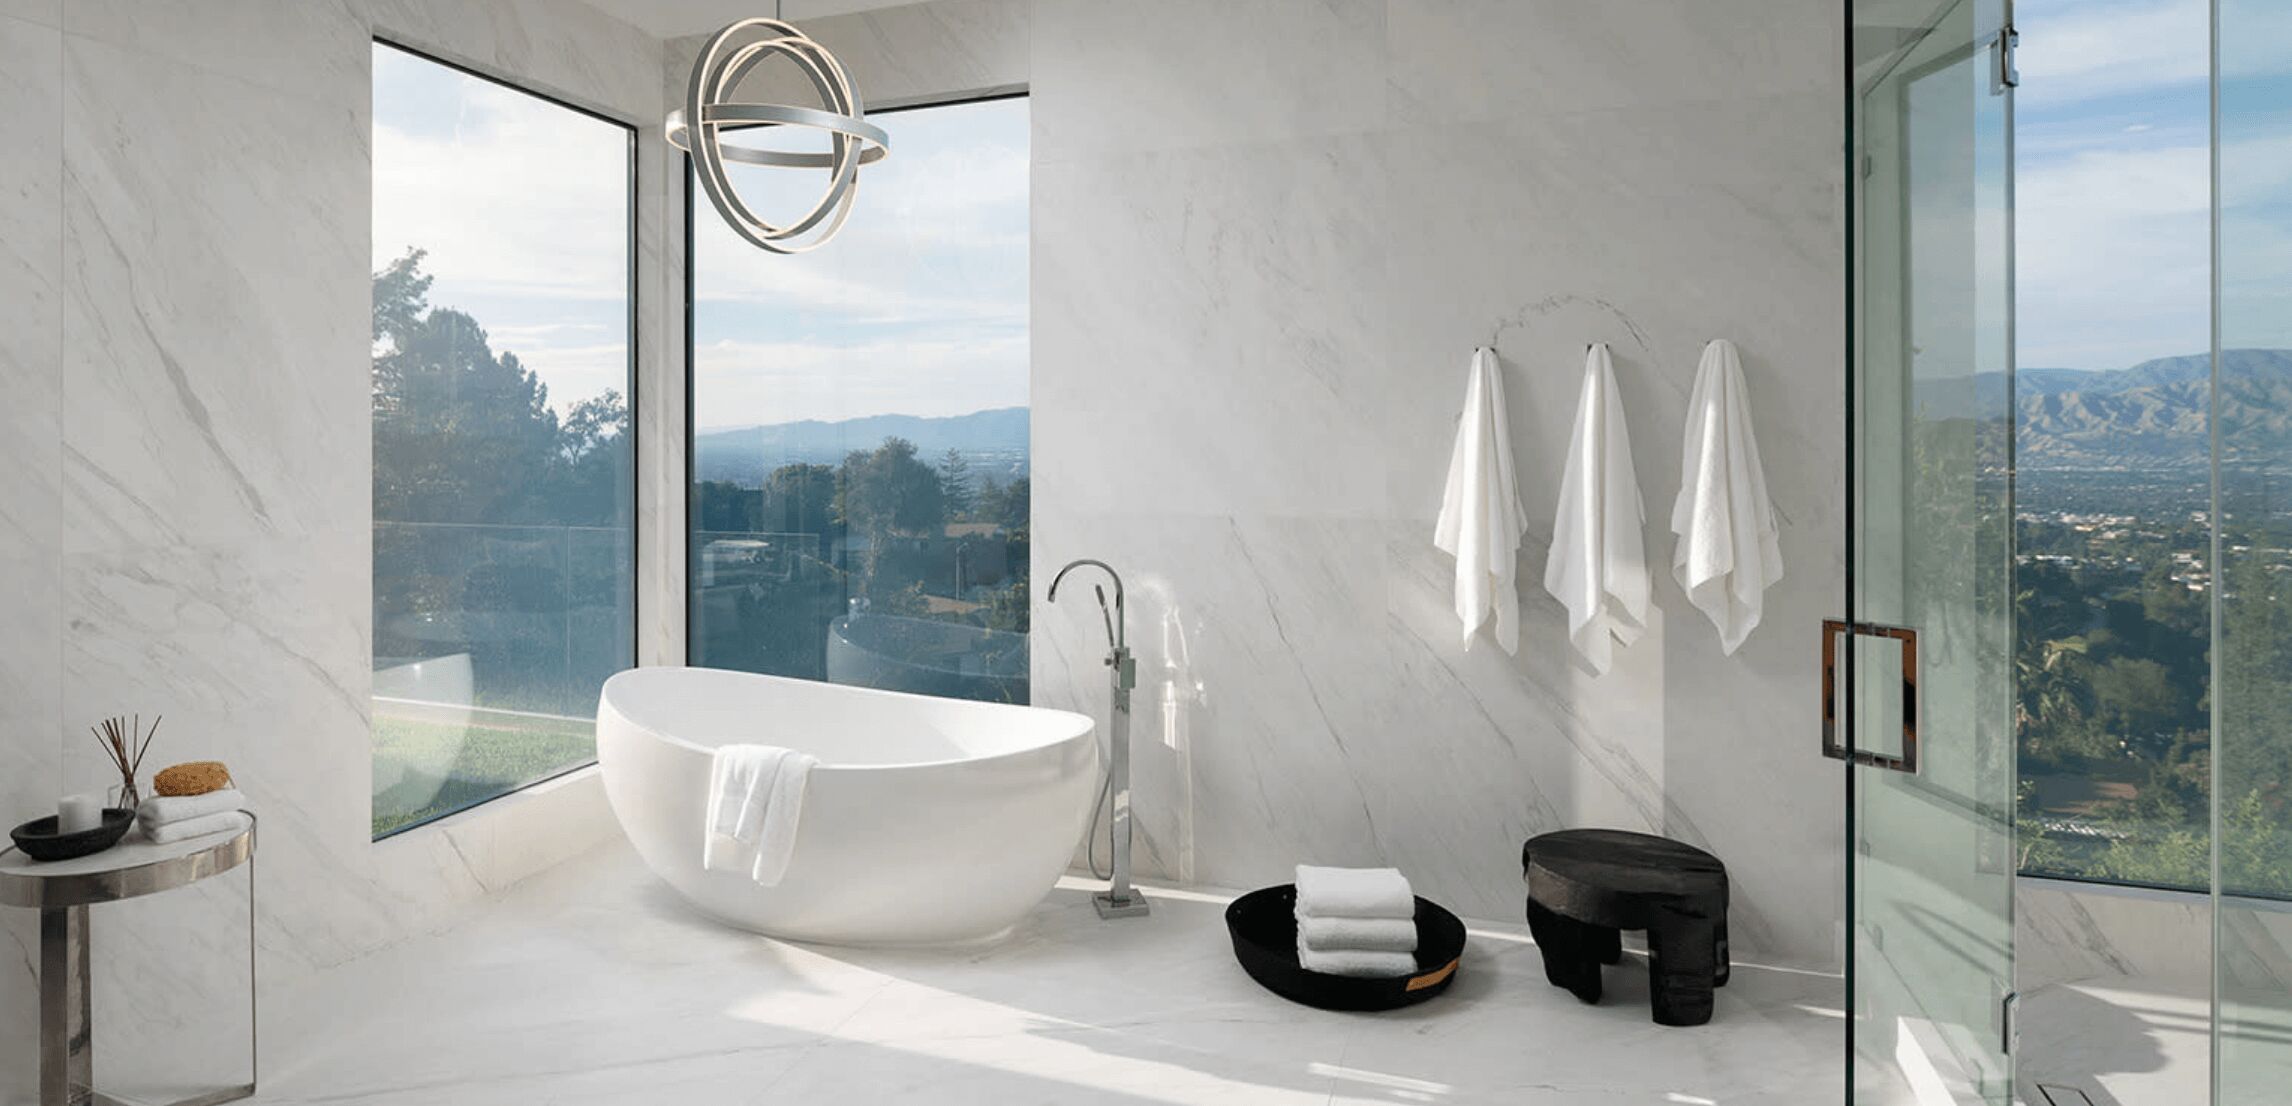 Open bathroom designed by architects in San Francisco